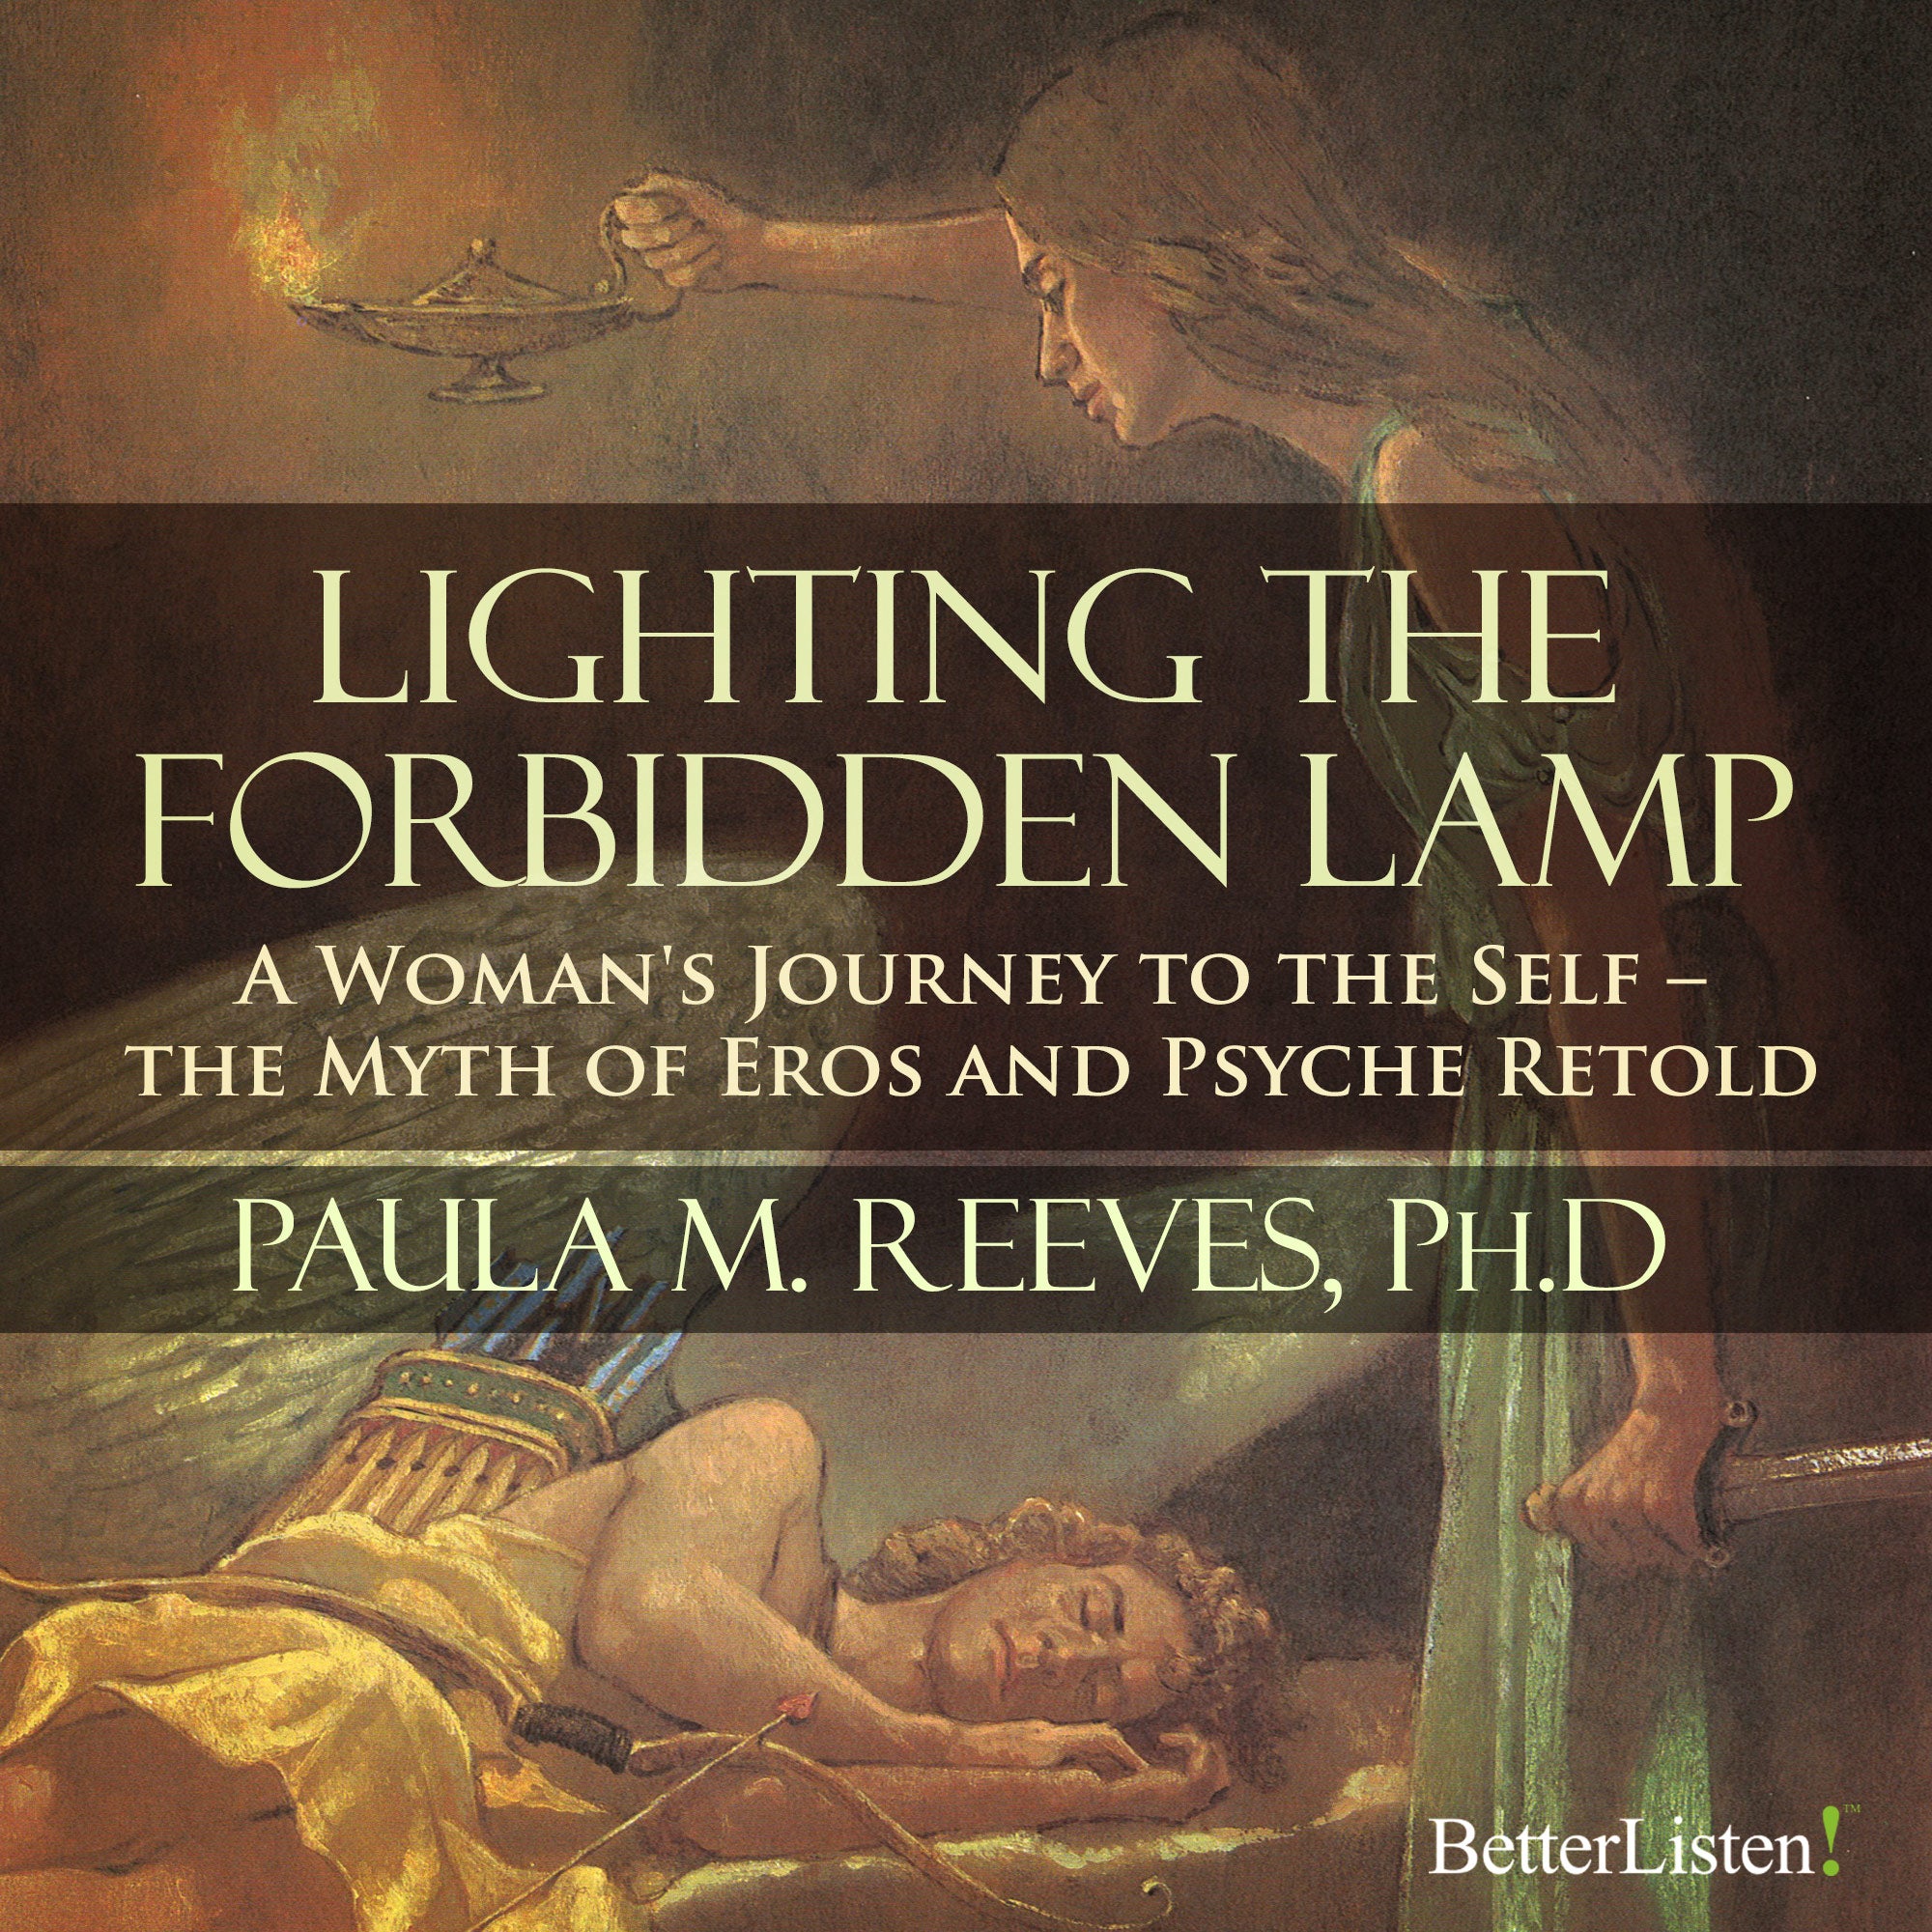 Lighting the Forbidden Lamp: A Woman's Journey to the Self with Paula M. Reeves, PHD